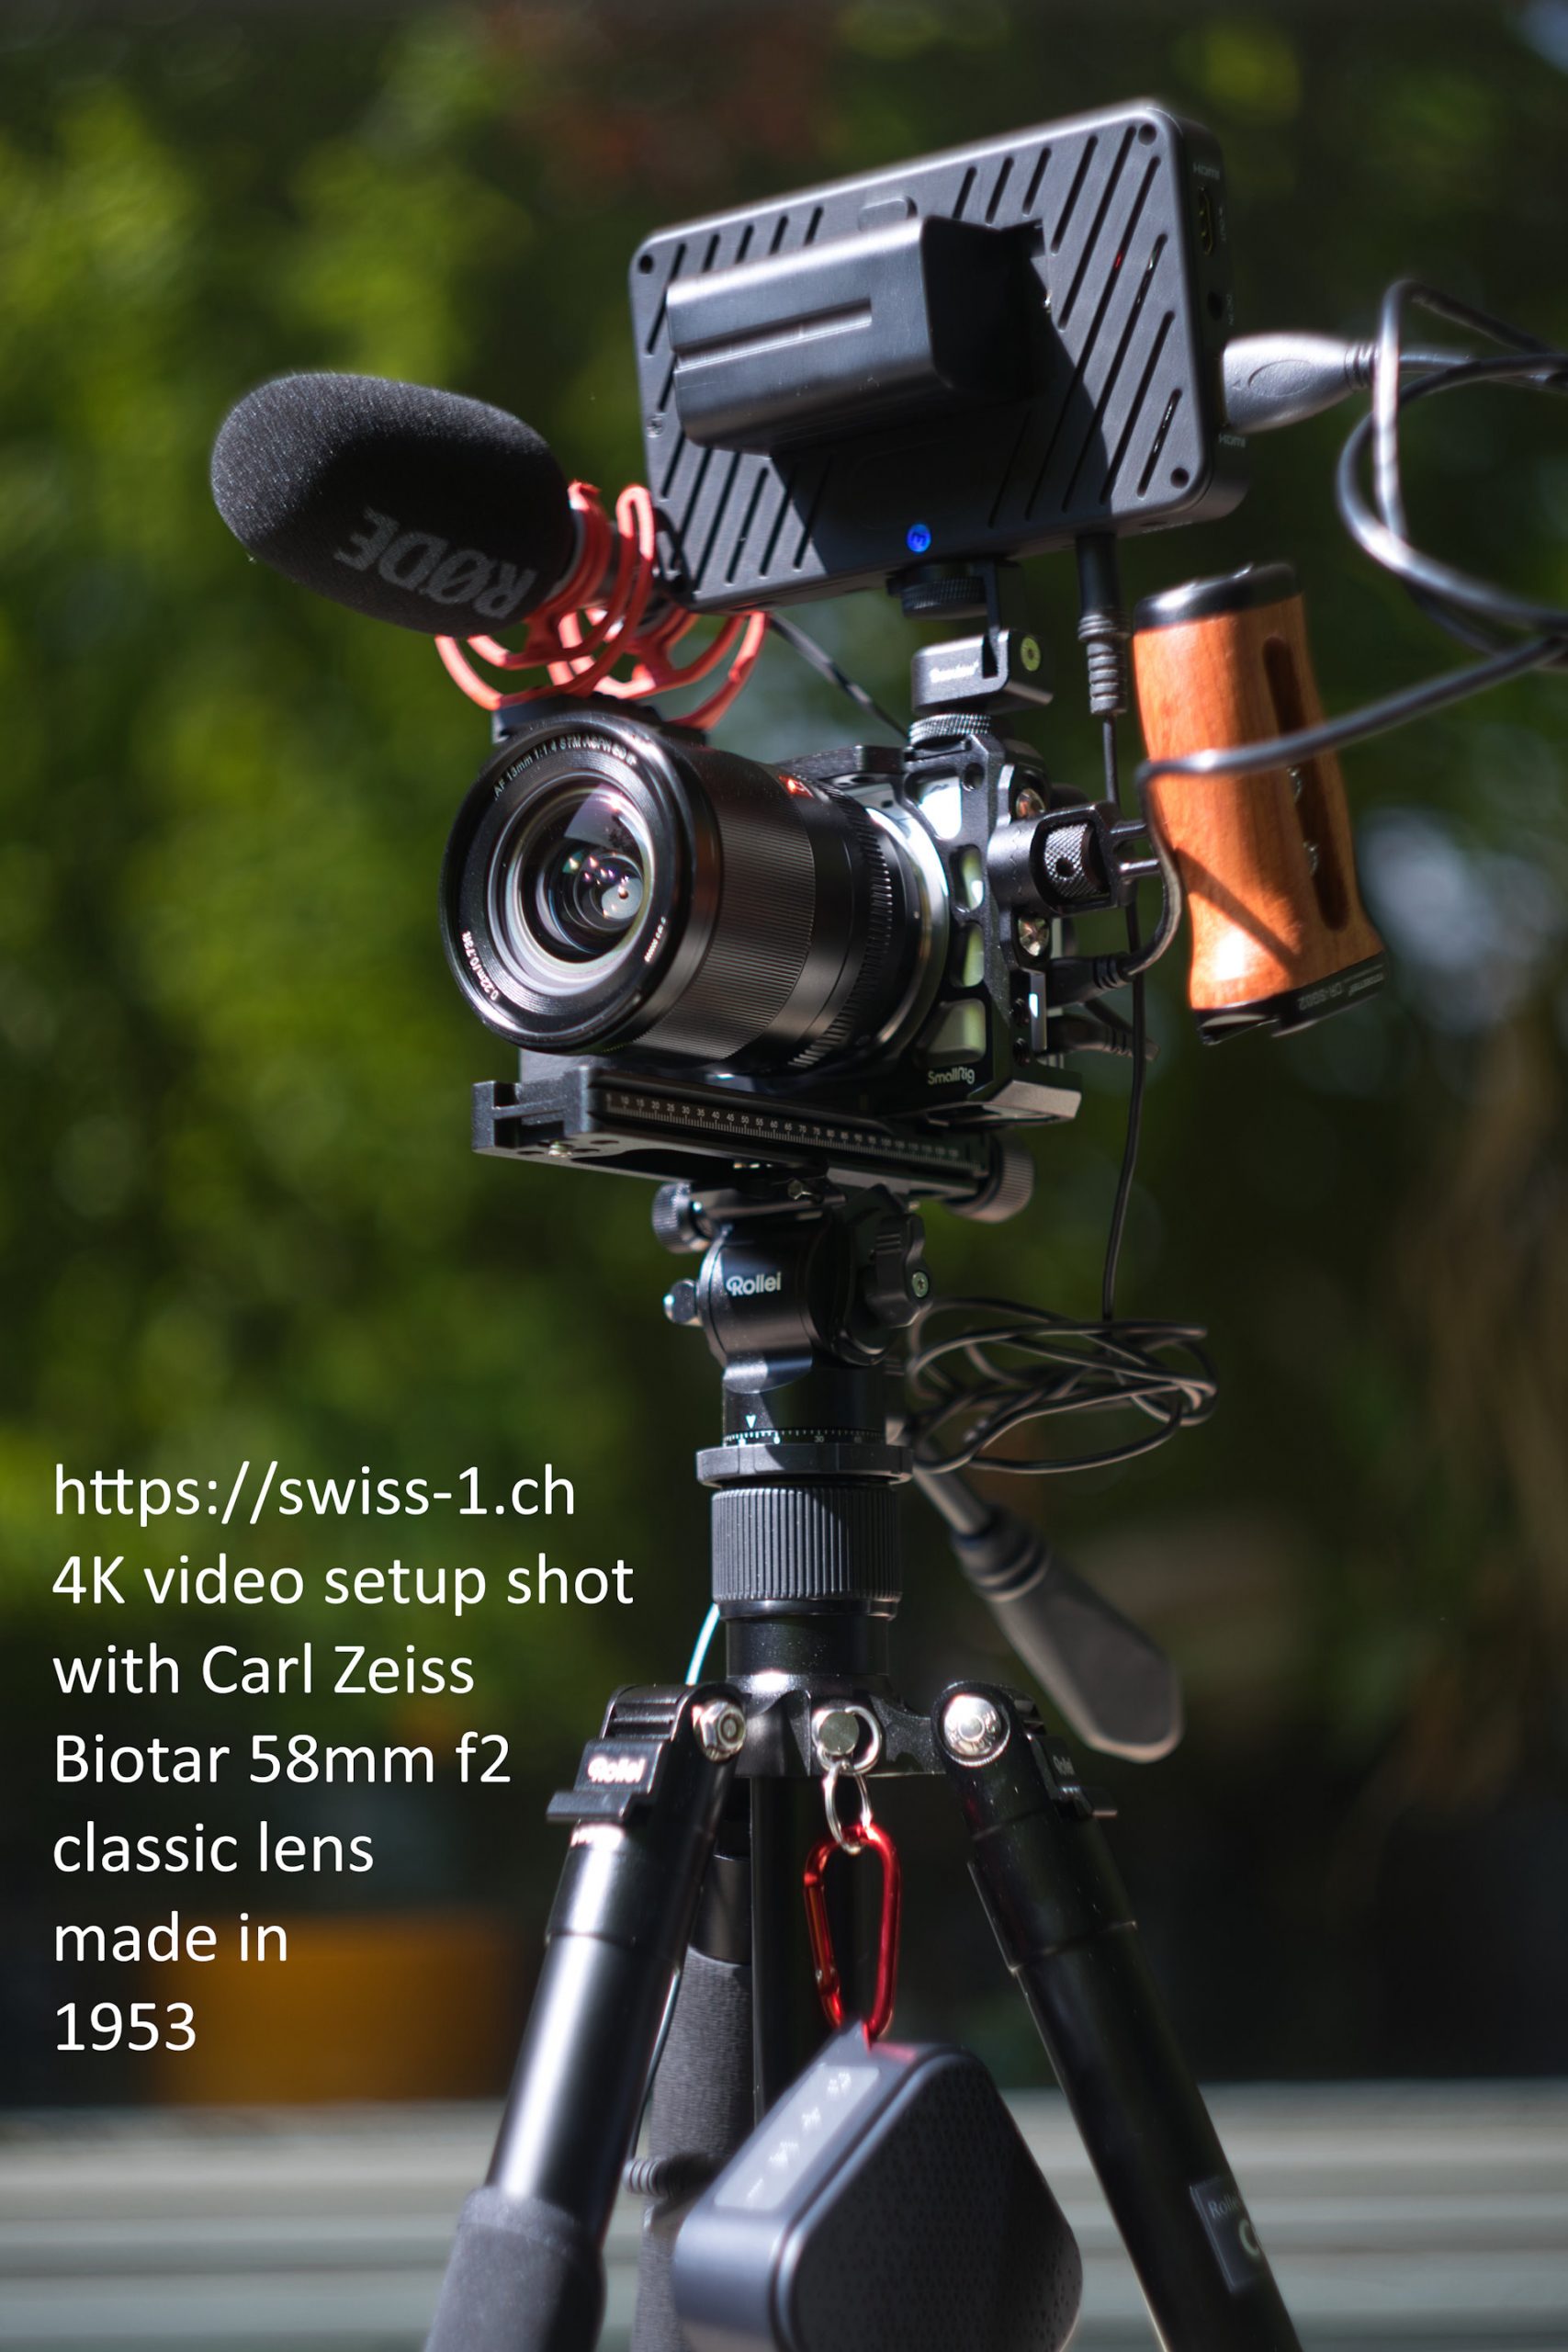 Viltrox 13mm f1.4 wide-angle lens ony a Sony a6100 APS-C camera in my 4K video setup, klick on image to enlarge